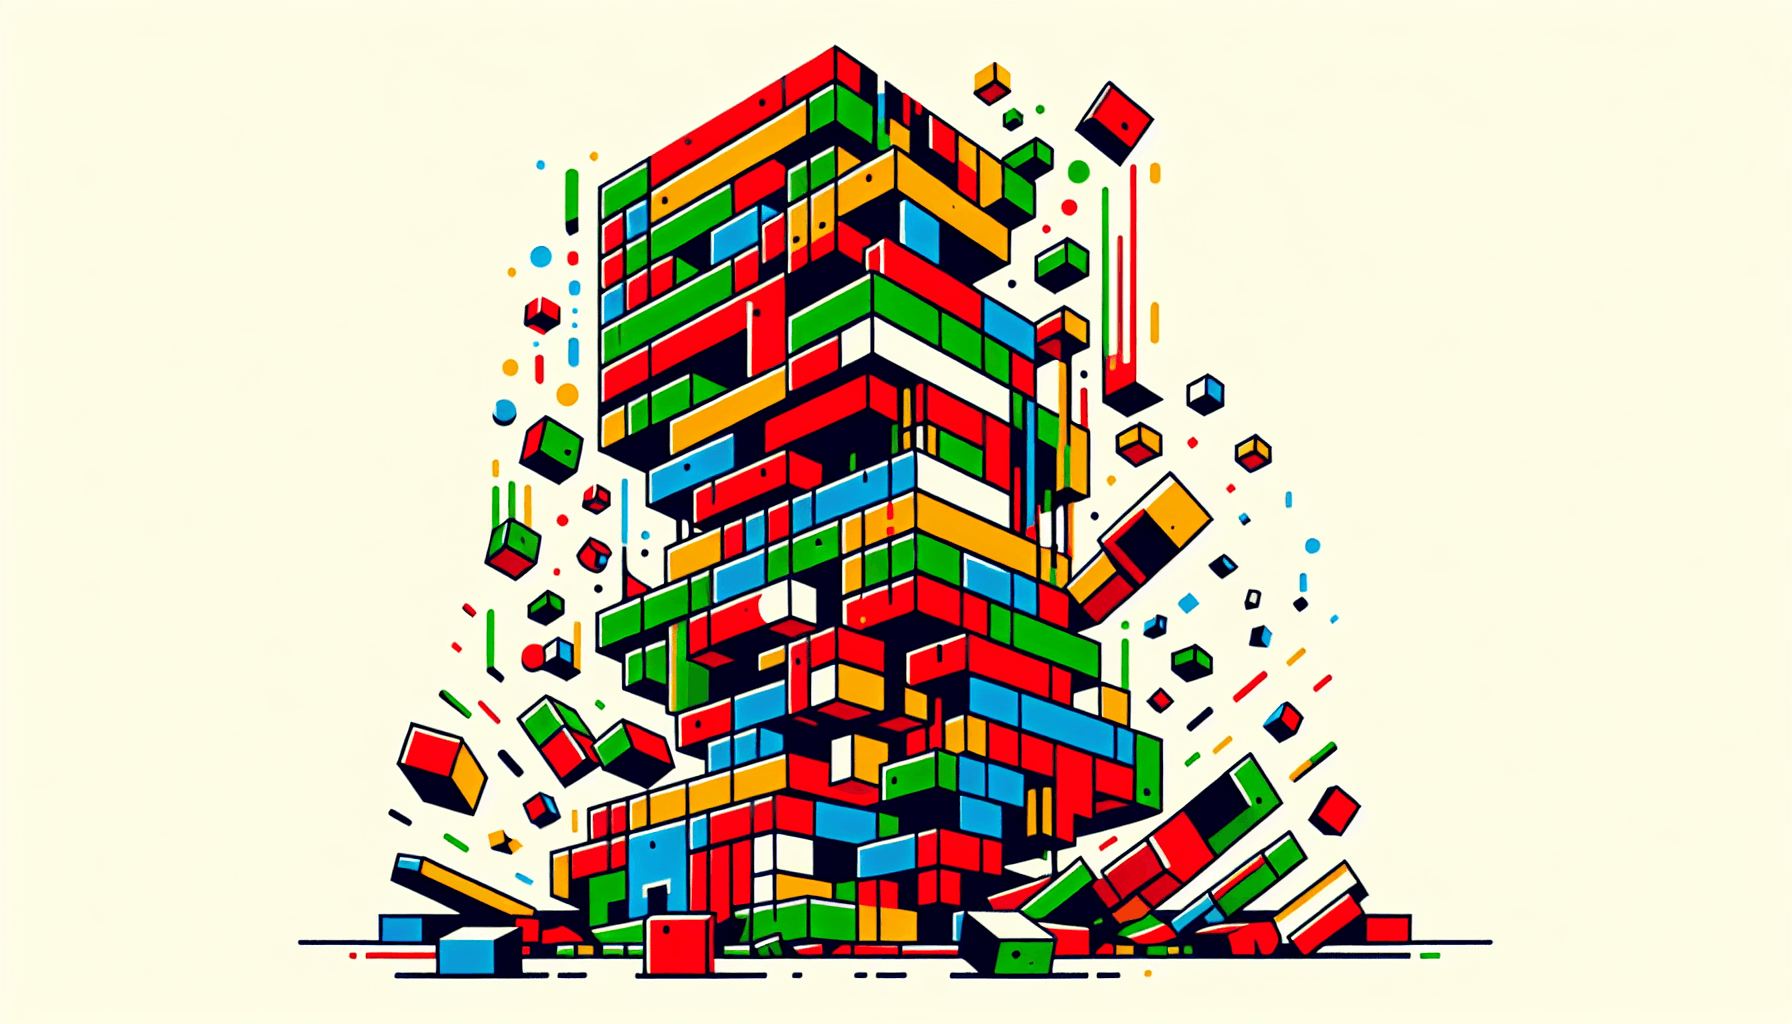 Toppling tower in flat illustration style and white background, red #f47574, green #88c7a8, yellow #fcc44b, and blue #645bc8 colors.